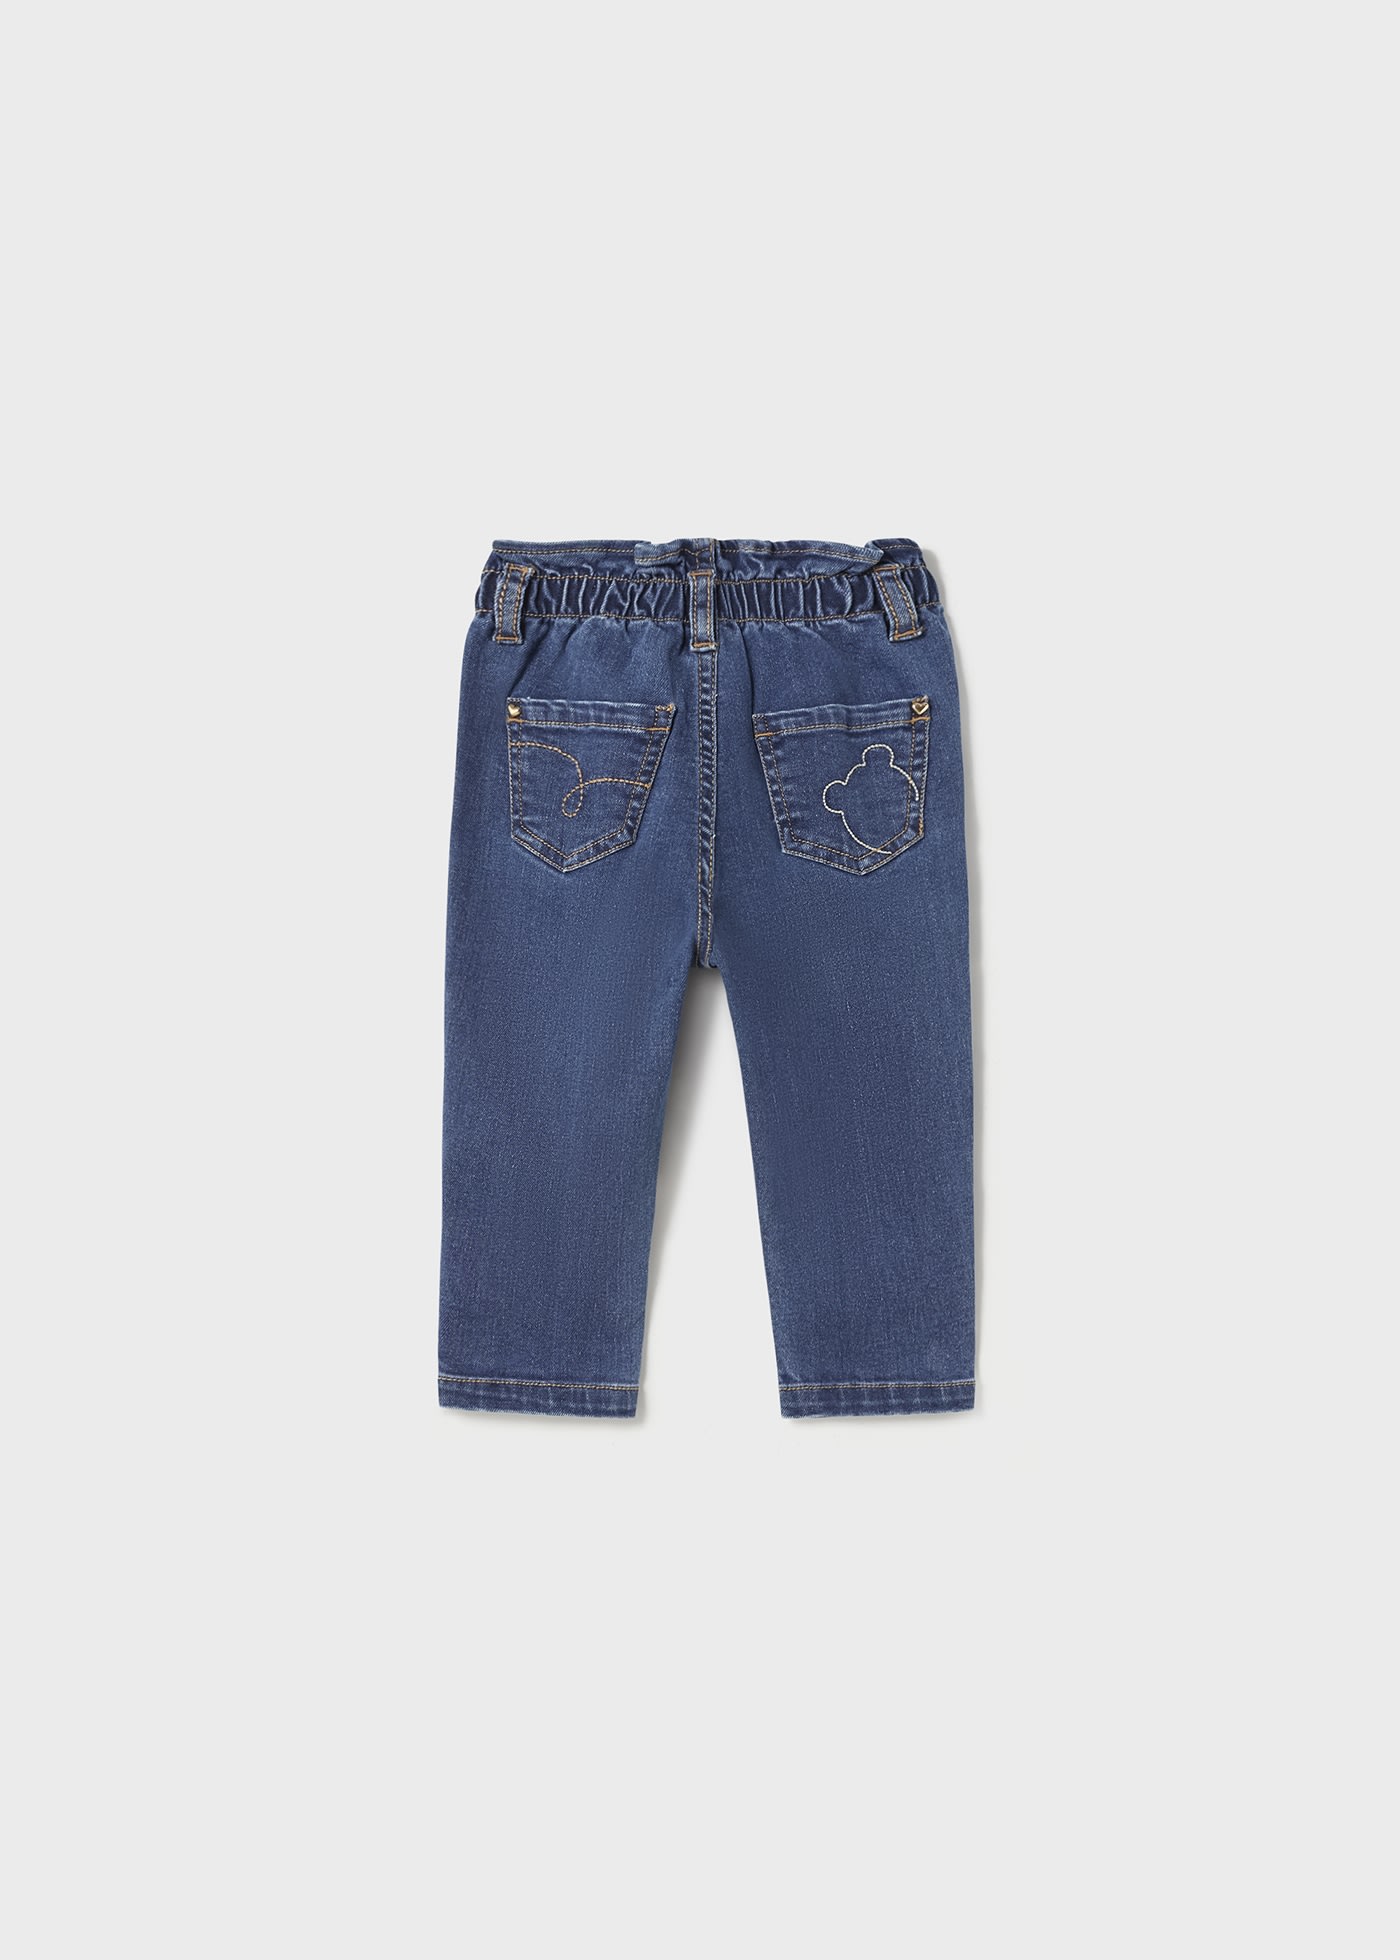 Jeanshose Slouchy Baby